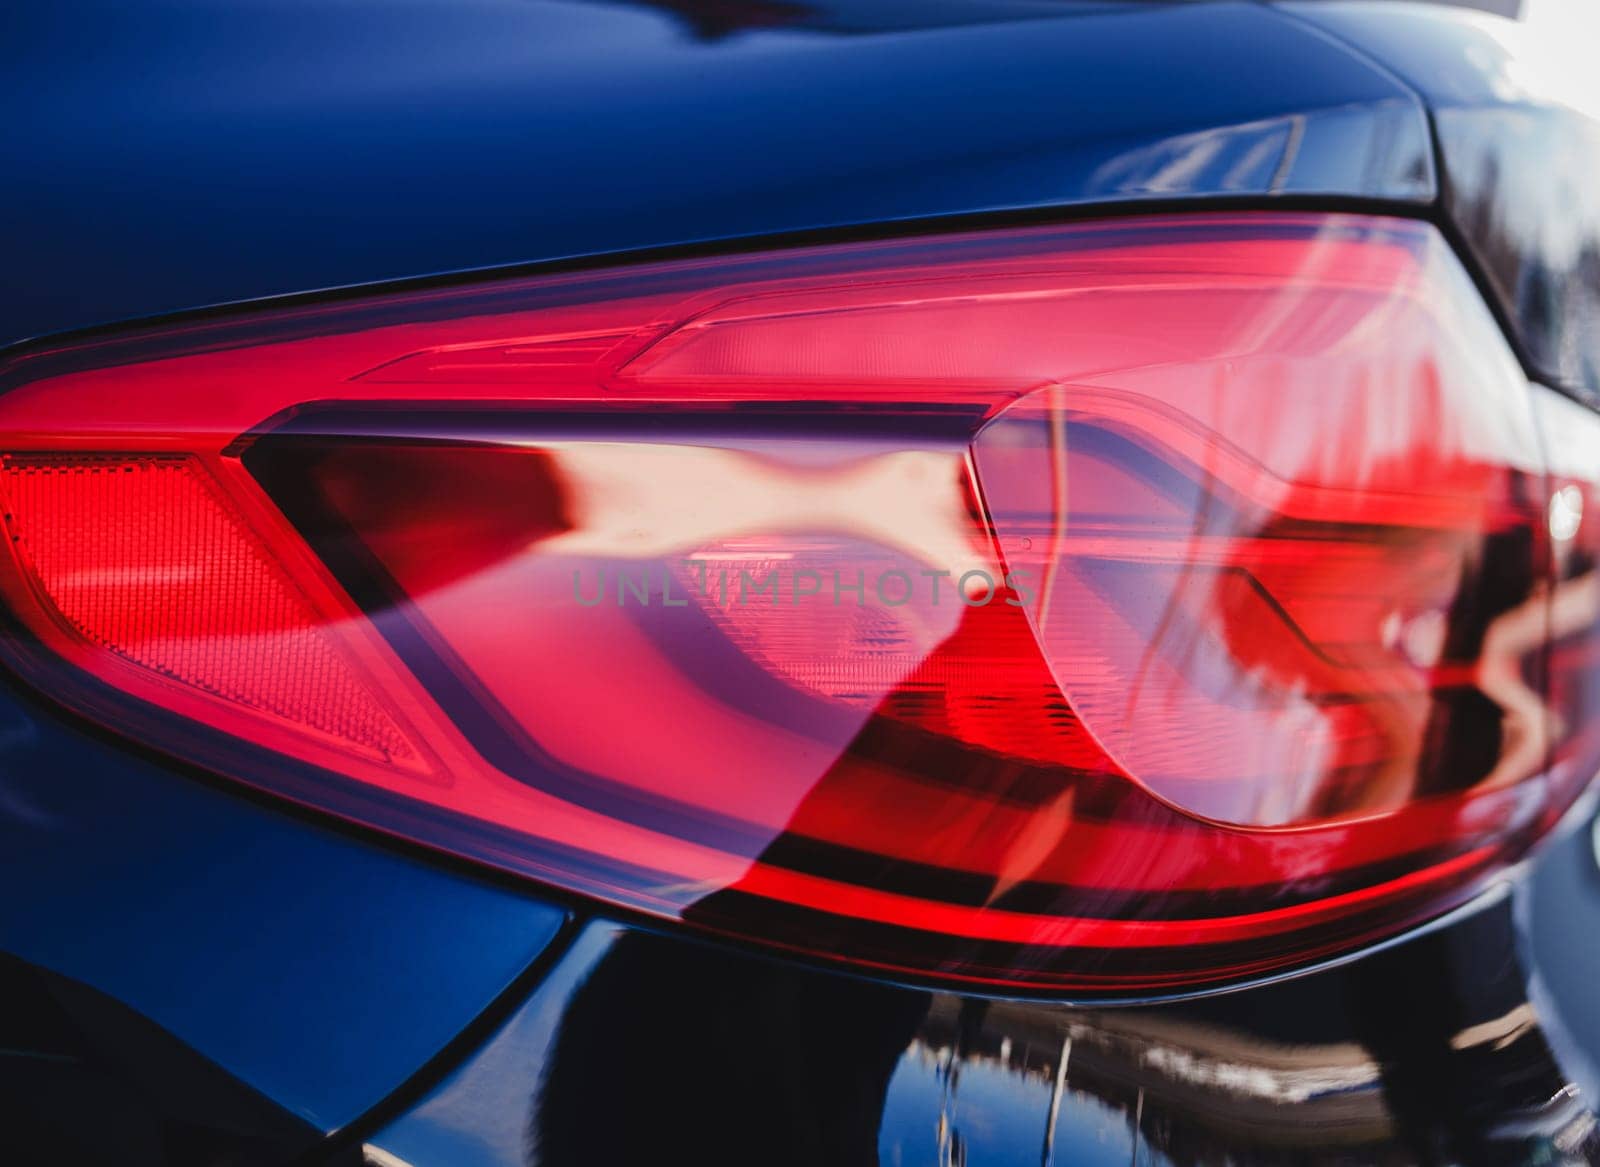 detail on the rear light of a luxury car.